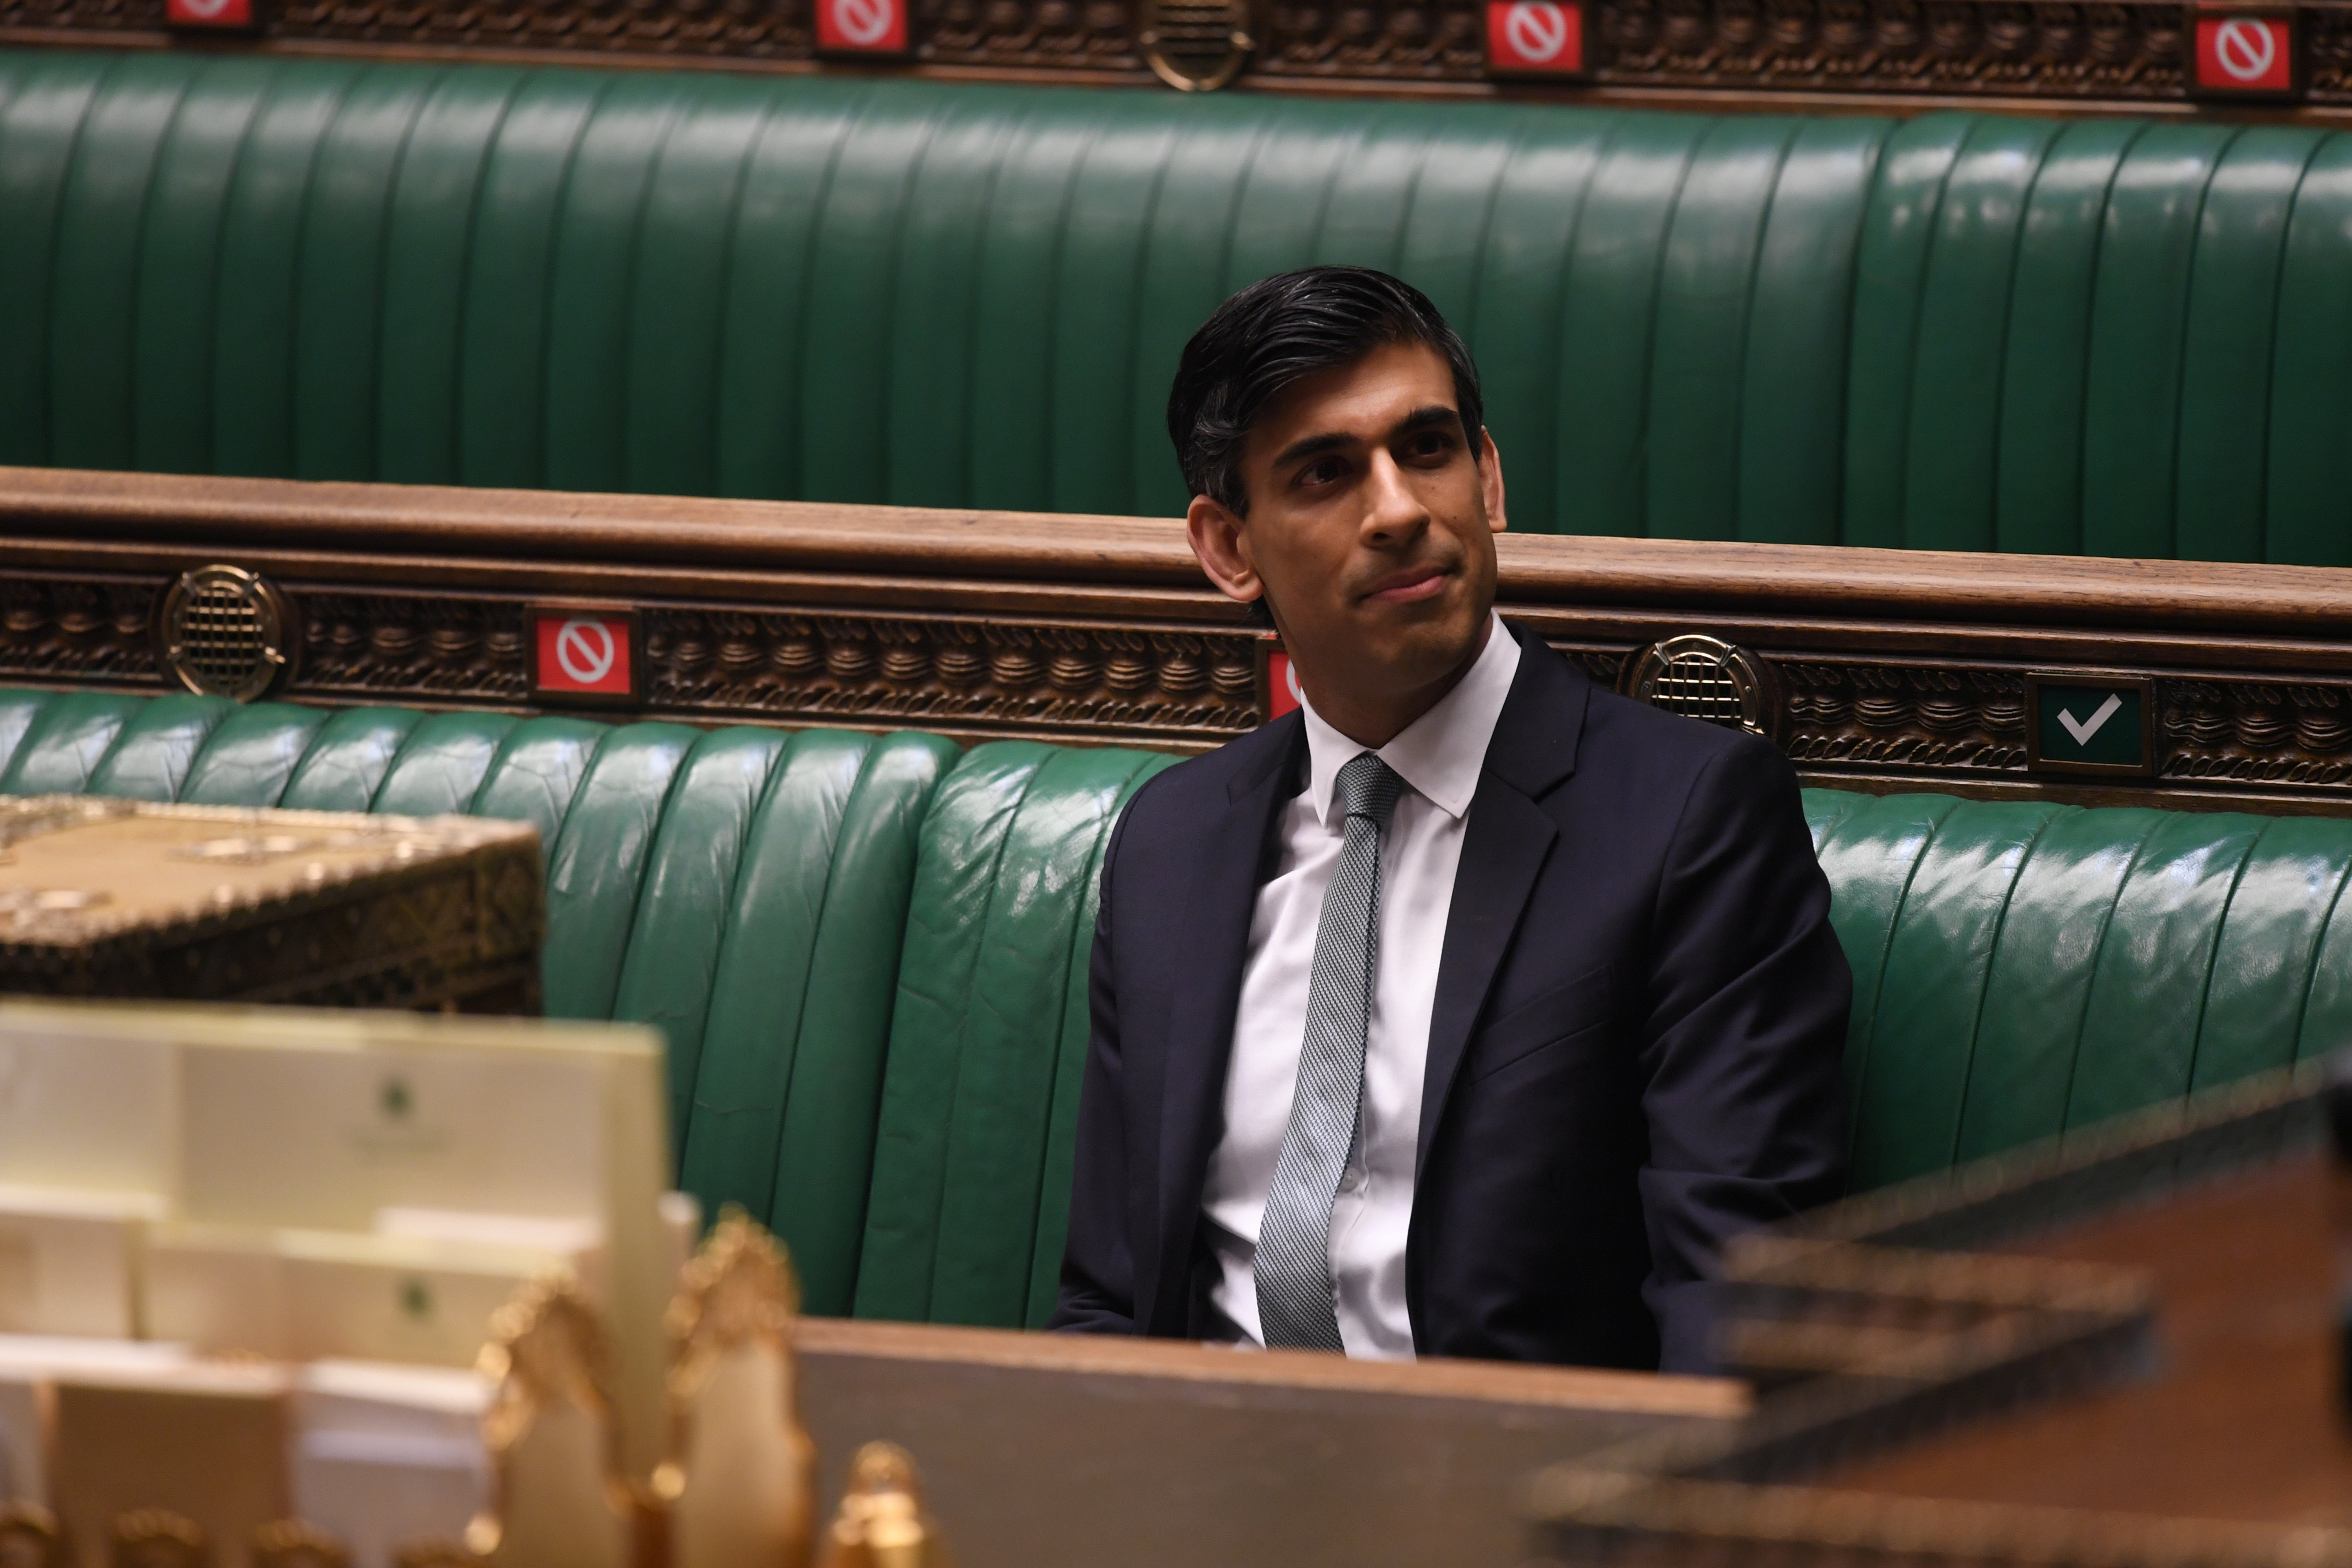 Rishi Sunak did not delay in relating the welcome news that the OBR now expects a ‘swifter and more sustained economic recovery’ thanks to the impressive vaccine roll out